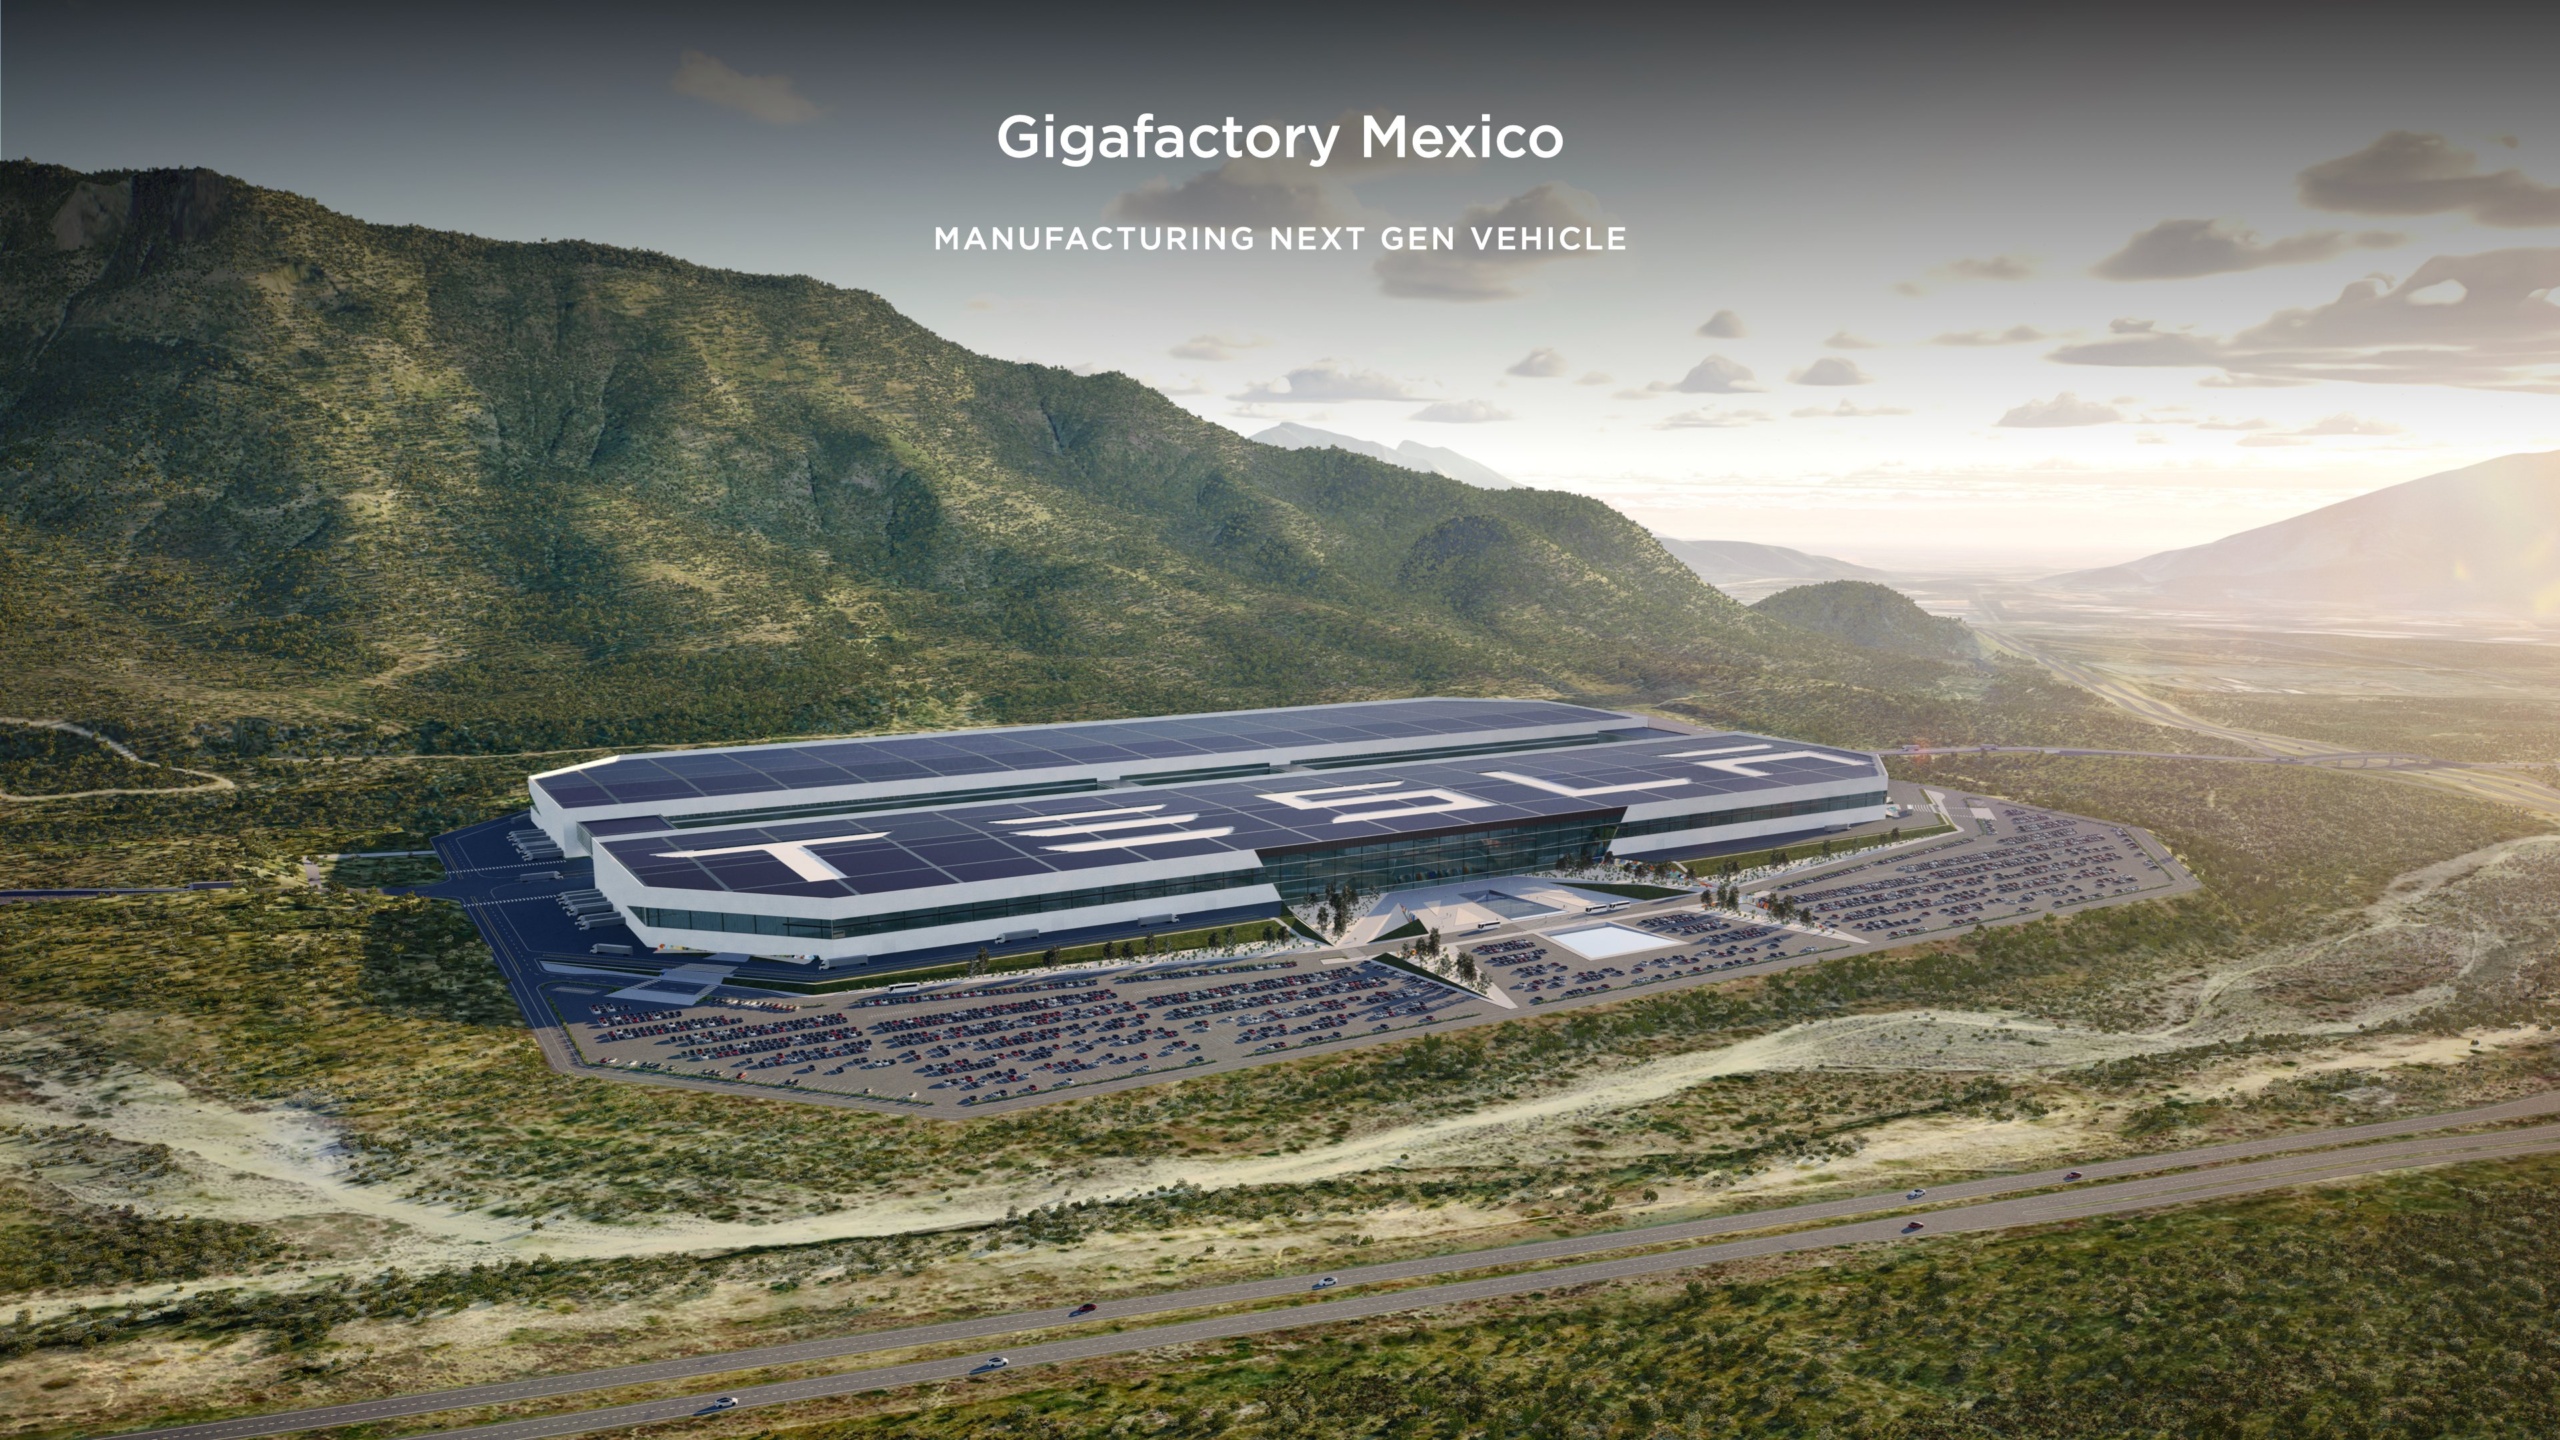 Tesla's $5bn Mexican plant is set to become its largest facility, producing 1m electric cars a year